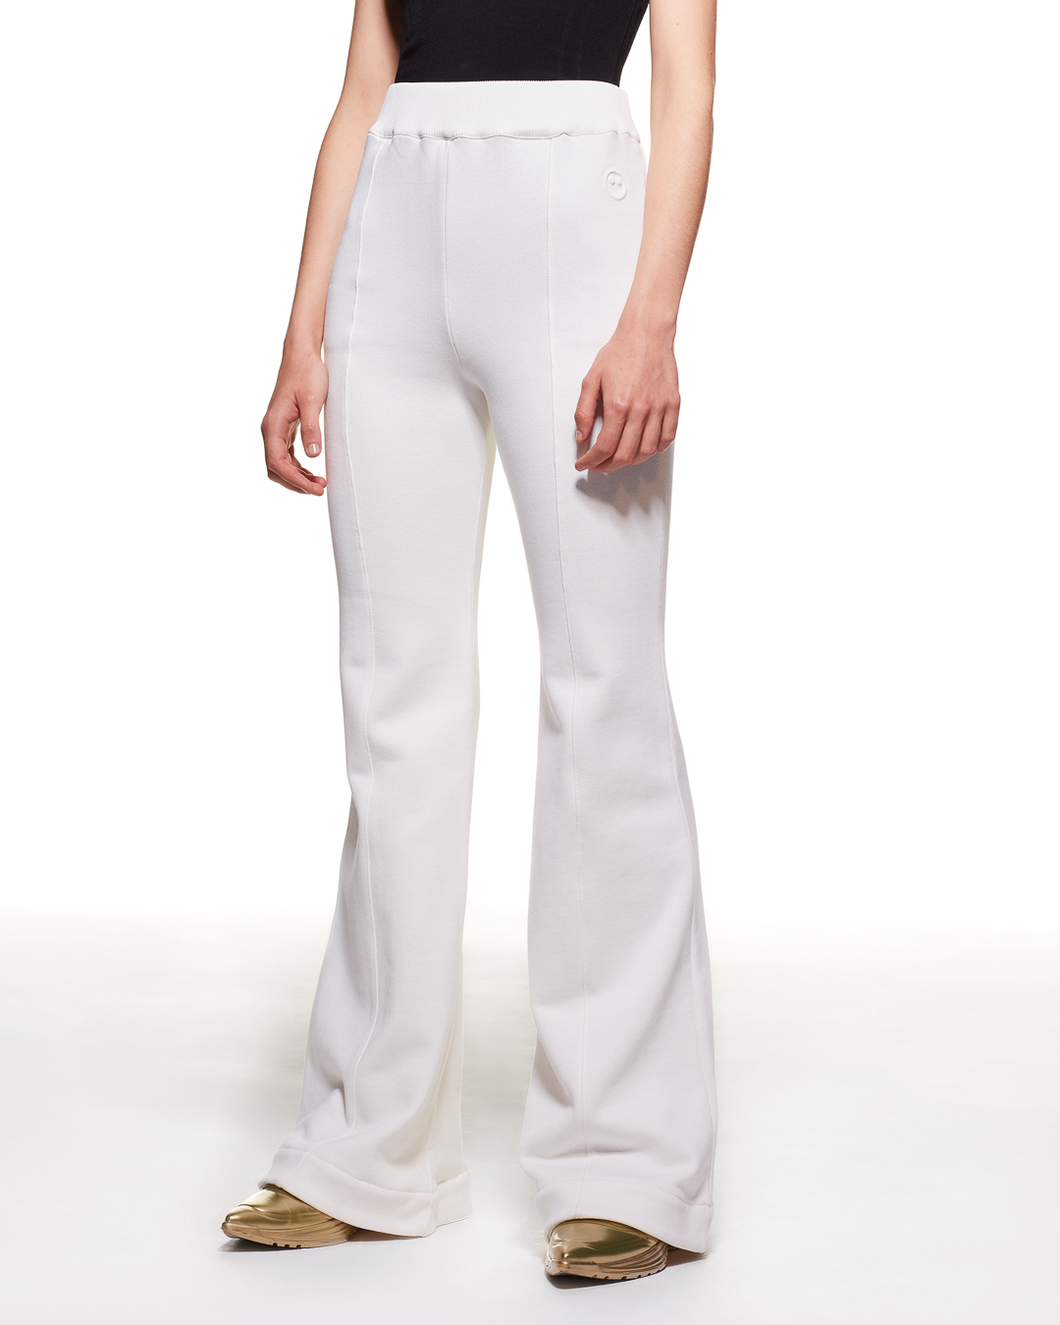 ORGANIC COTTON SEACELL BLEND FLARE PANTS - WHITE